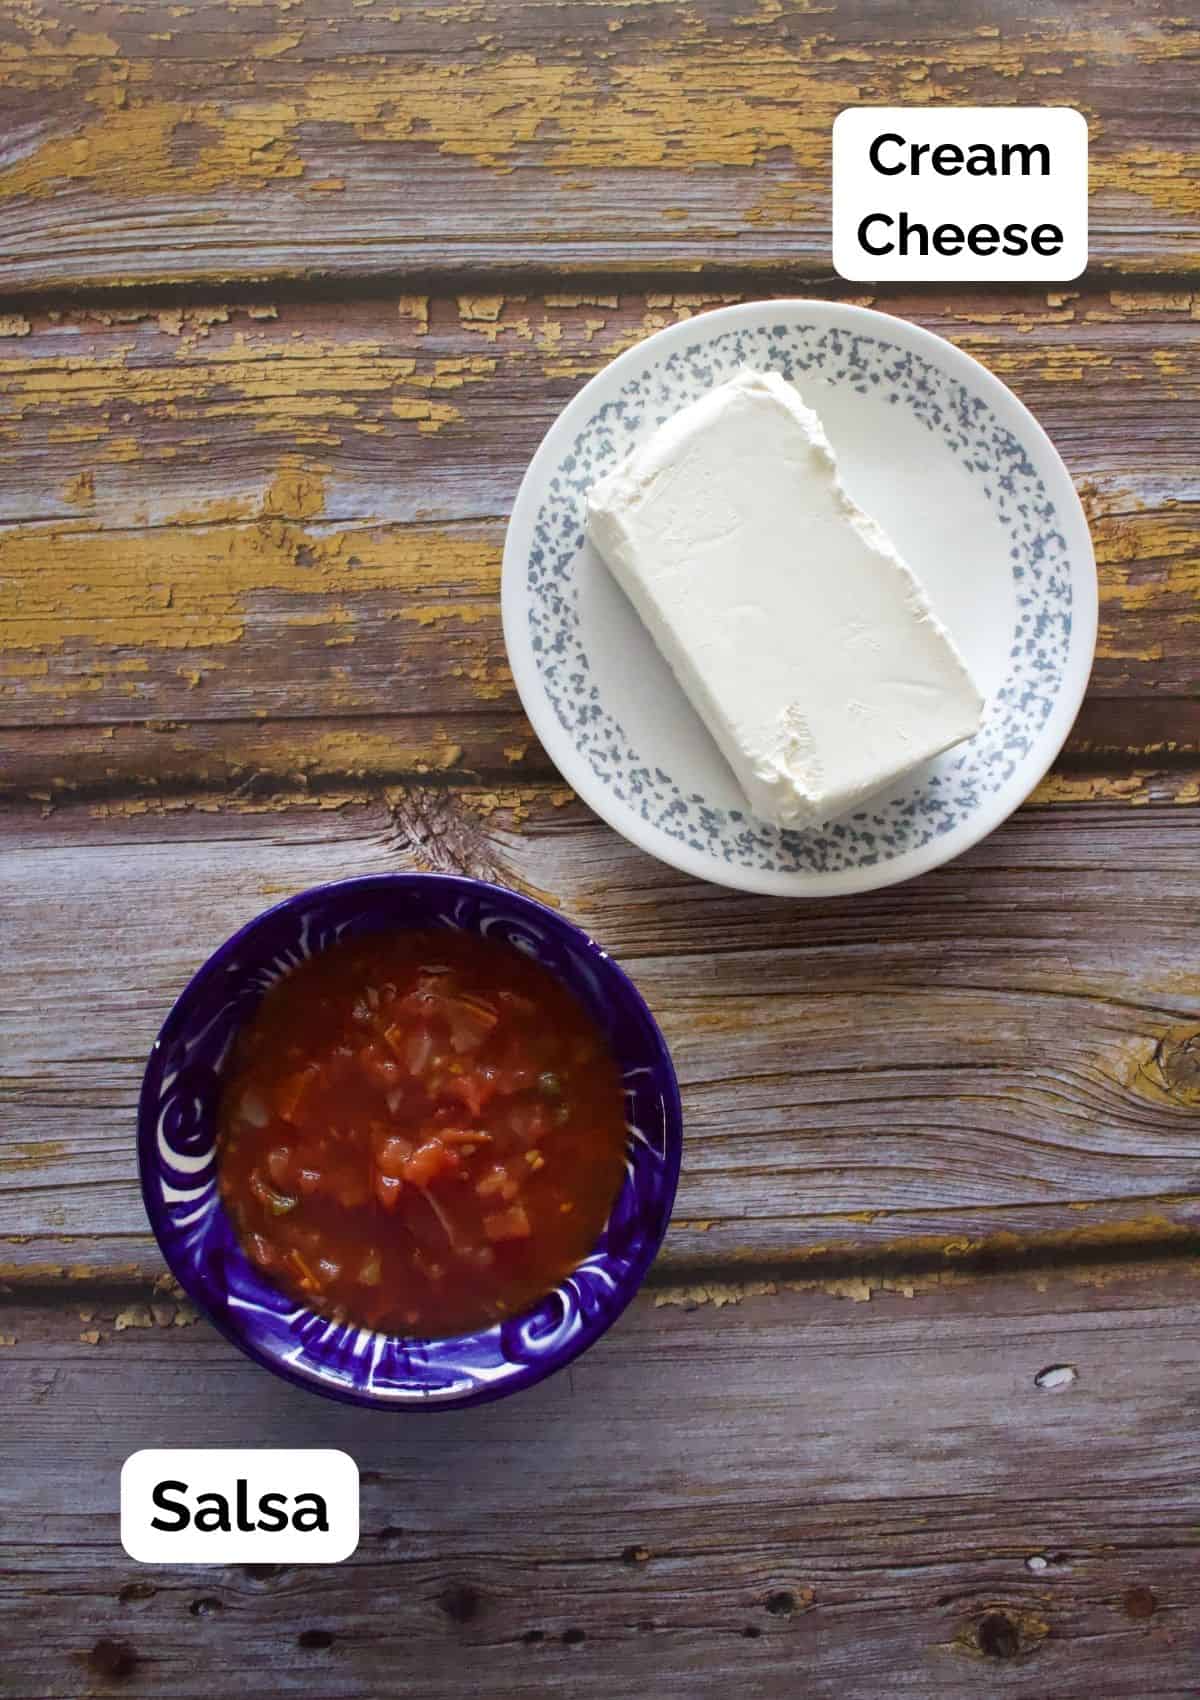 Cream cheese on a plate and salsa in a bowl sitting next to each other.